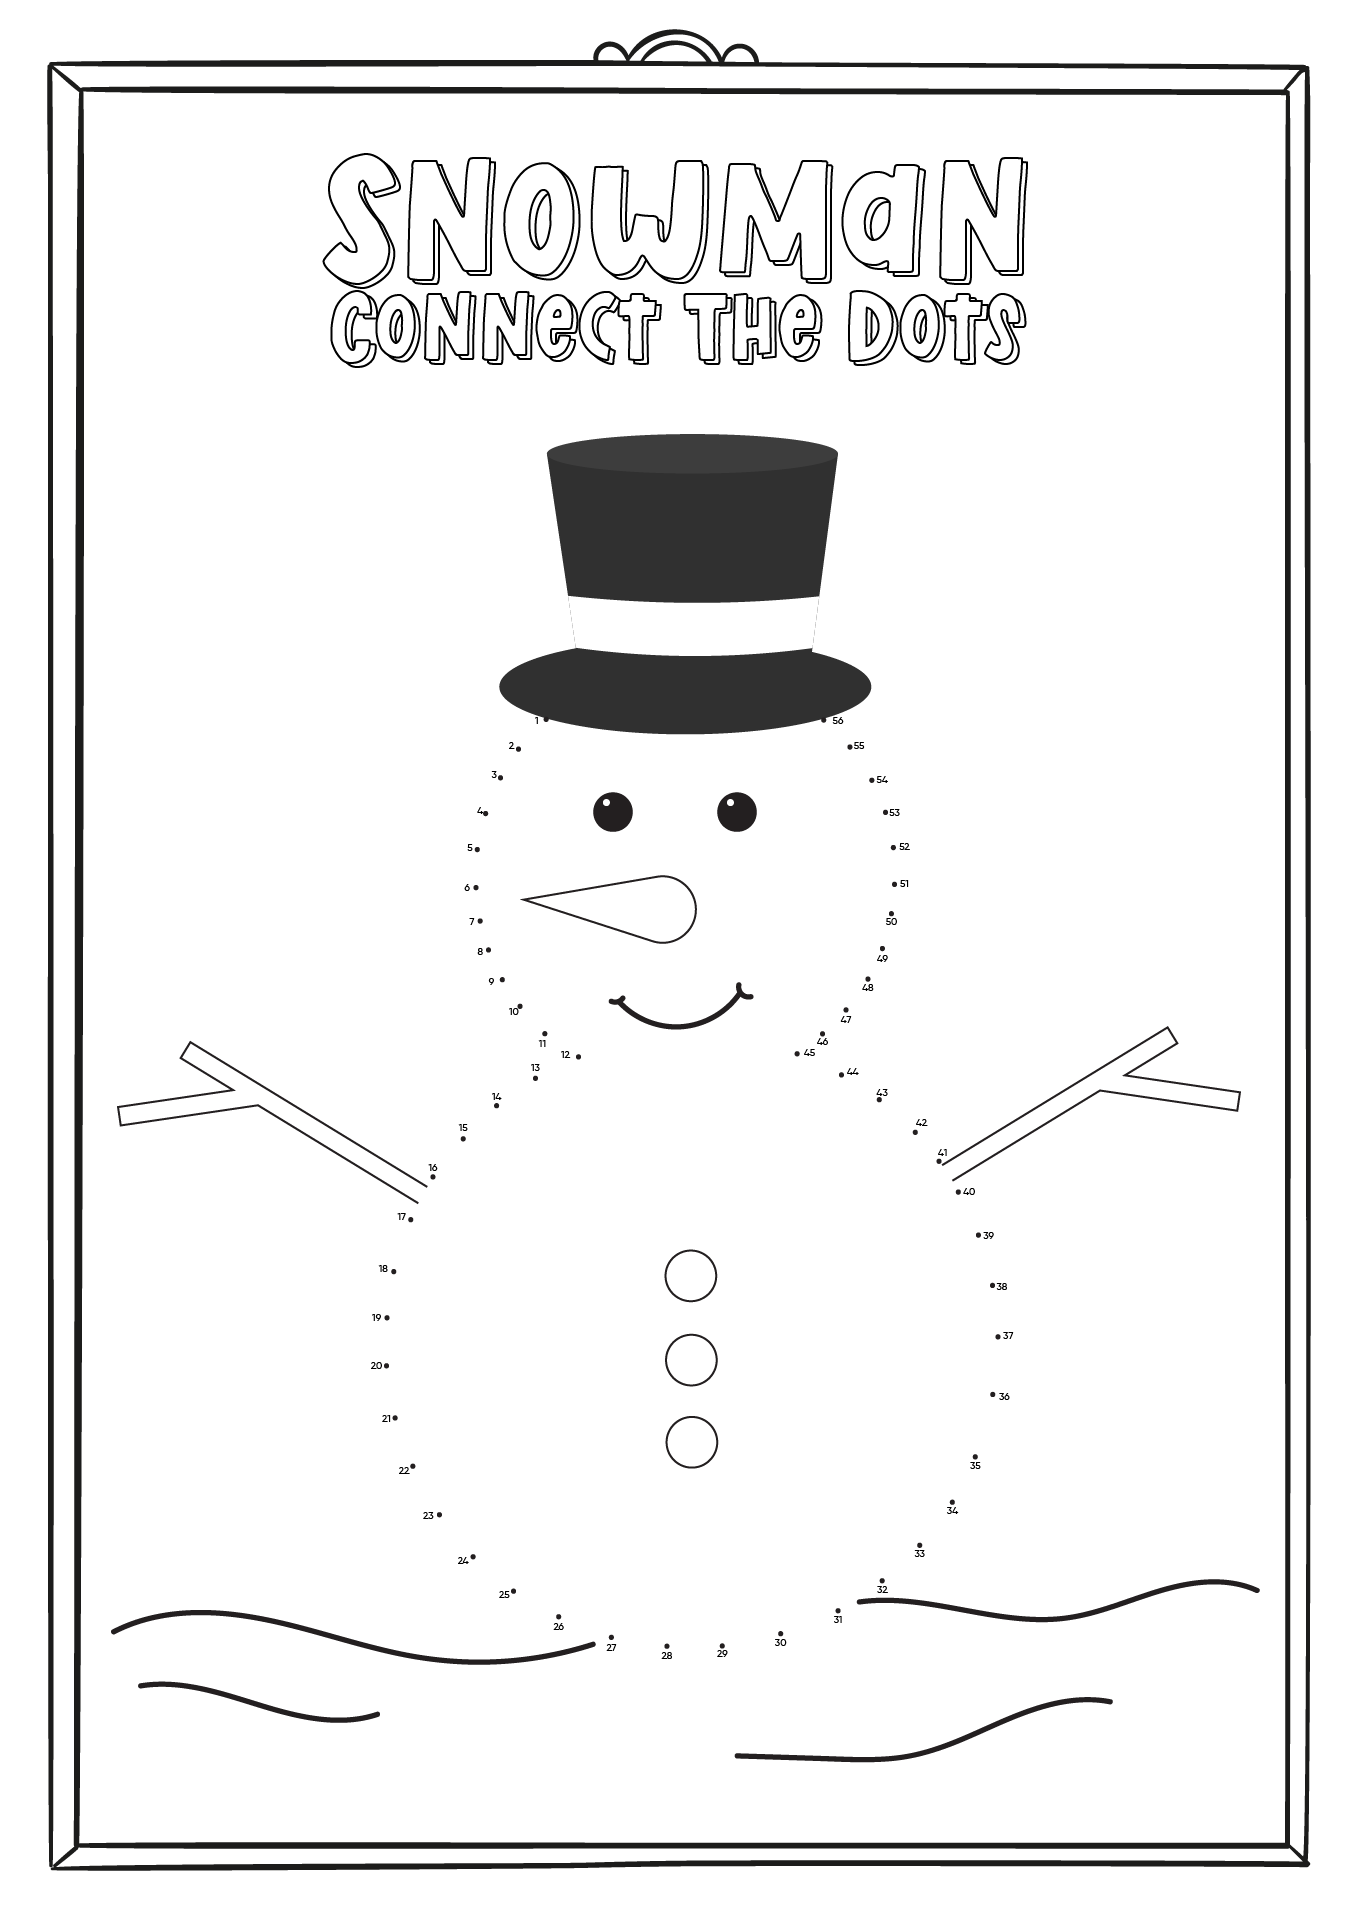 Snowman Connect the Dots Printable Image